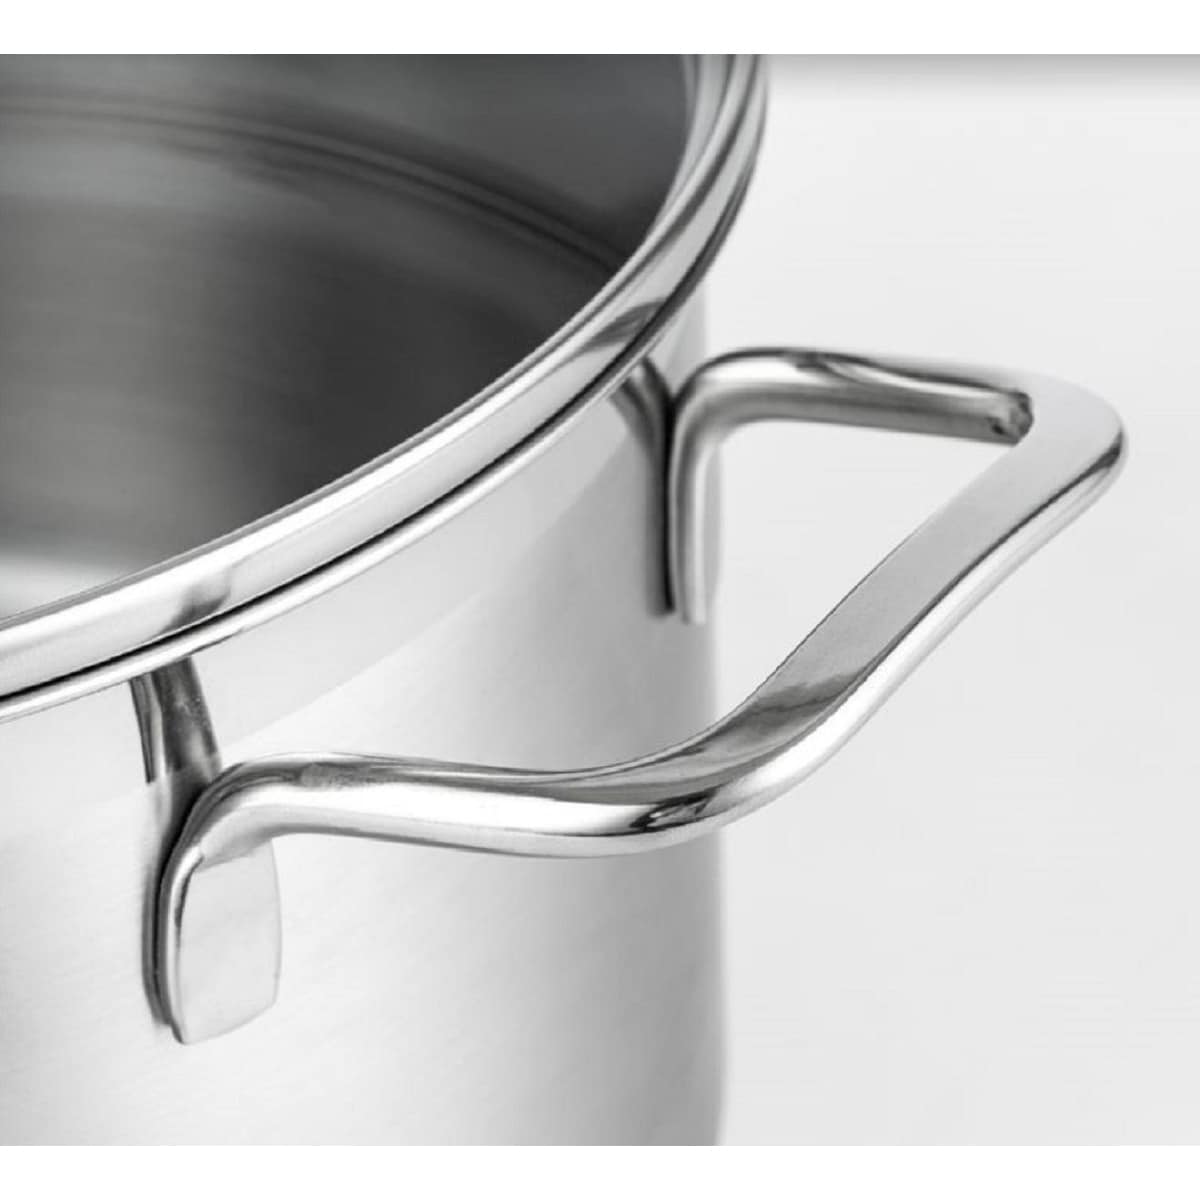 https://ak1.ostkcdn.com/images/products/is/images/direct/4f1076925b771d96d14184d41099fceb703b9ecc/Prime-Cook-4-qt.-Stainless-Steel-Soup-Pot-with-Lid.jpg